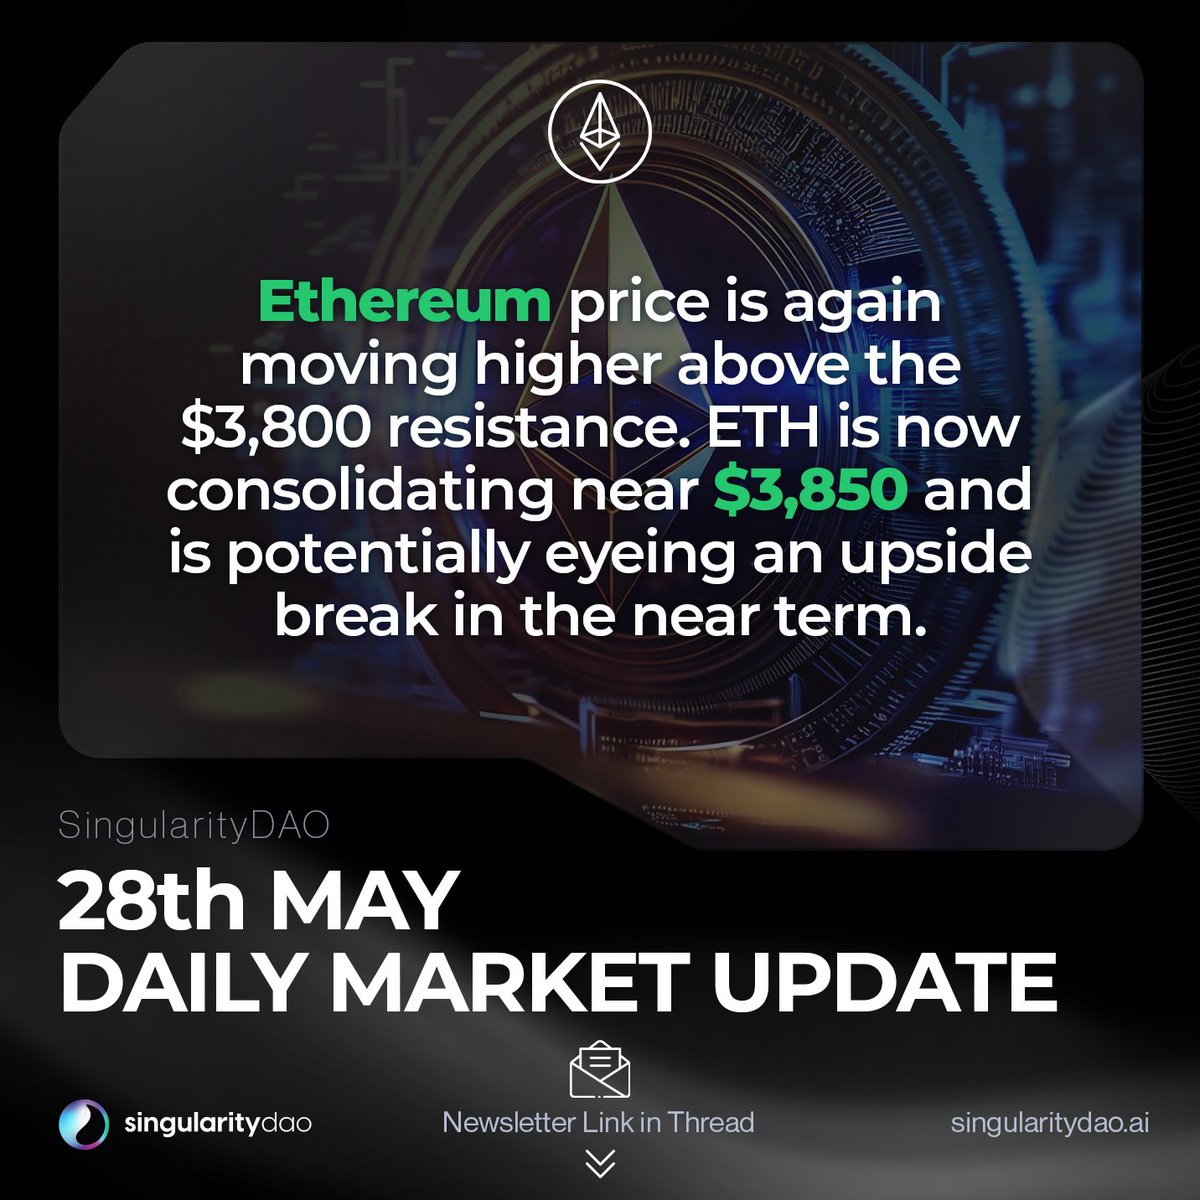 Daily Market Update - May 28th -Ethereum price is again moving higher above the $3,800 resistance. ETH is now consolidating near $3,850 and is potentially eyeing an upside break in the near term.